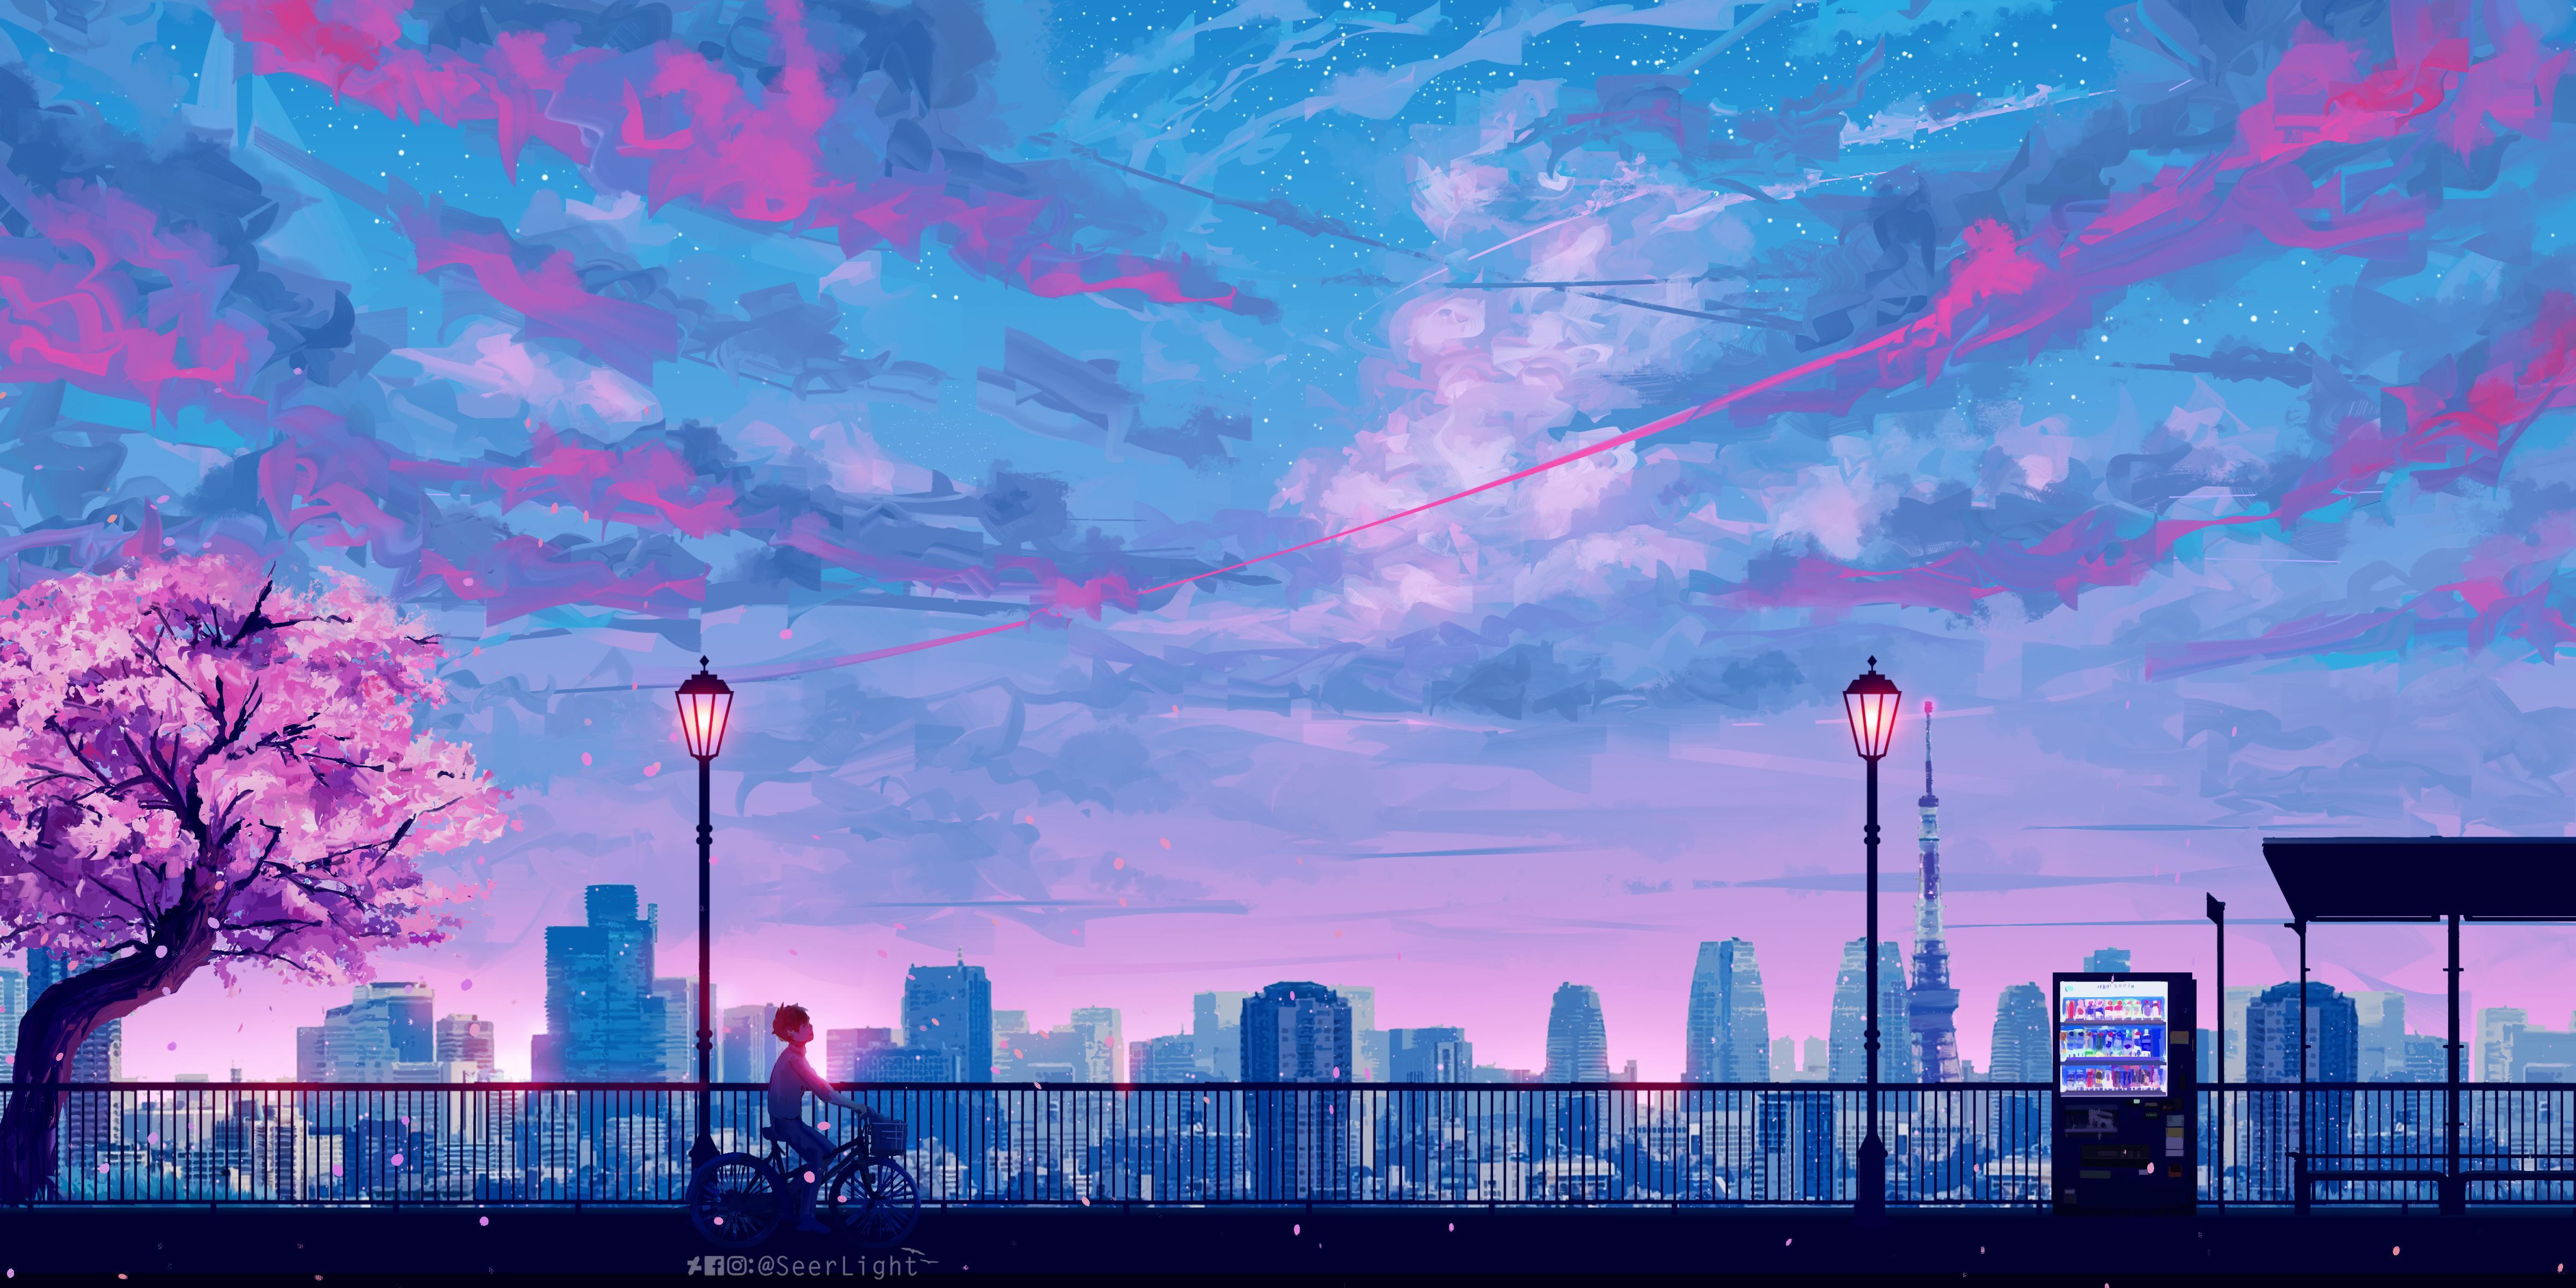 4k Aesthetic Anime Wallpapers Top Free 4k Aesthetic Anime Backgrounds Wallpaperaccess